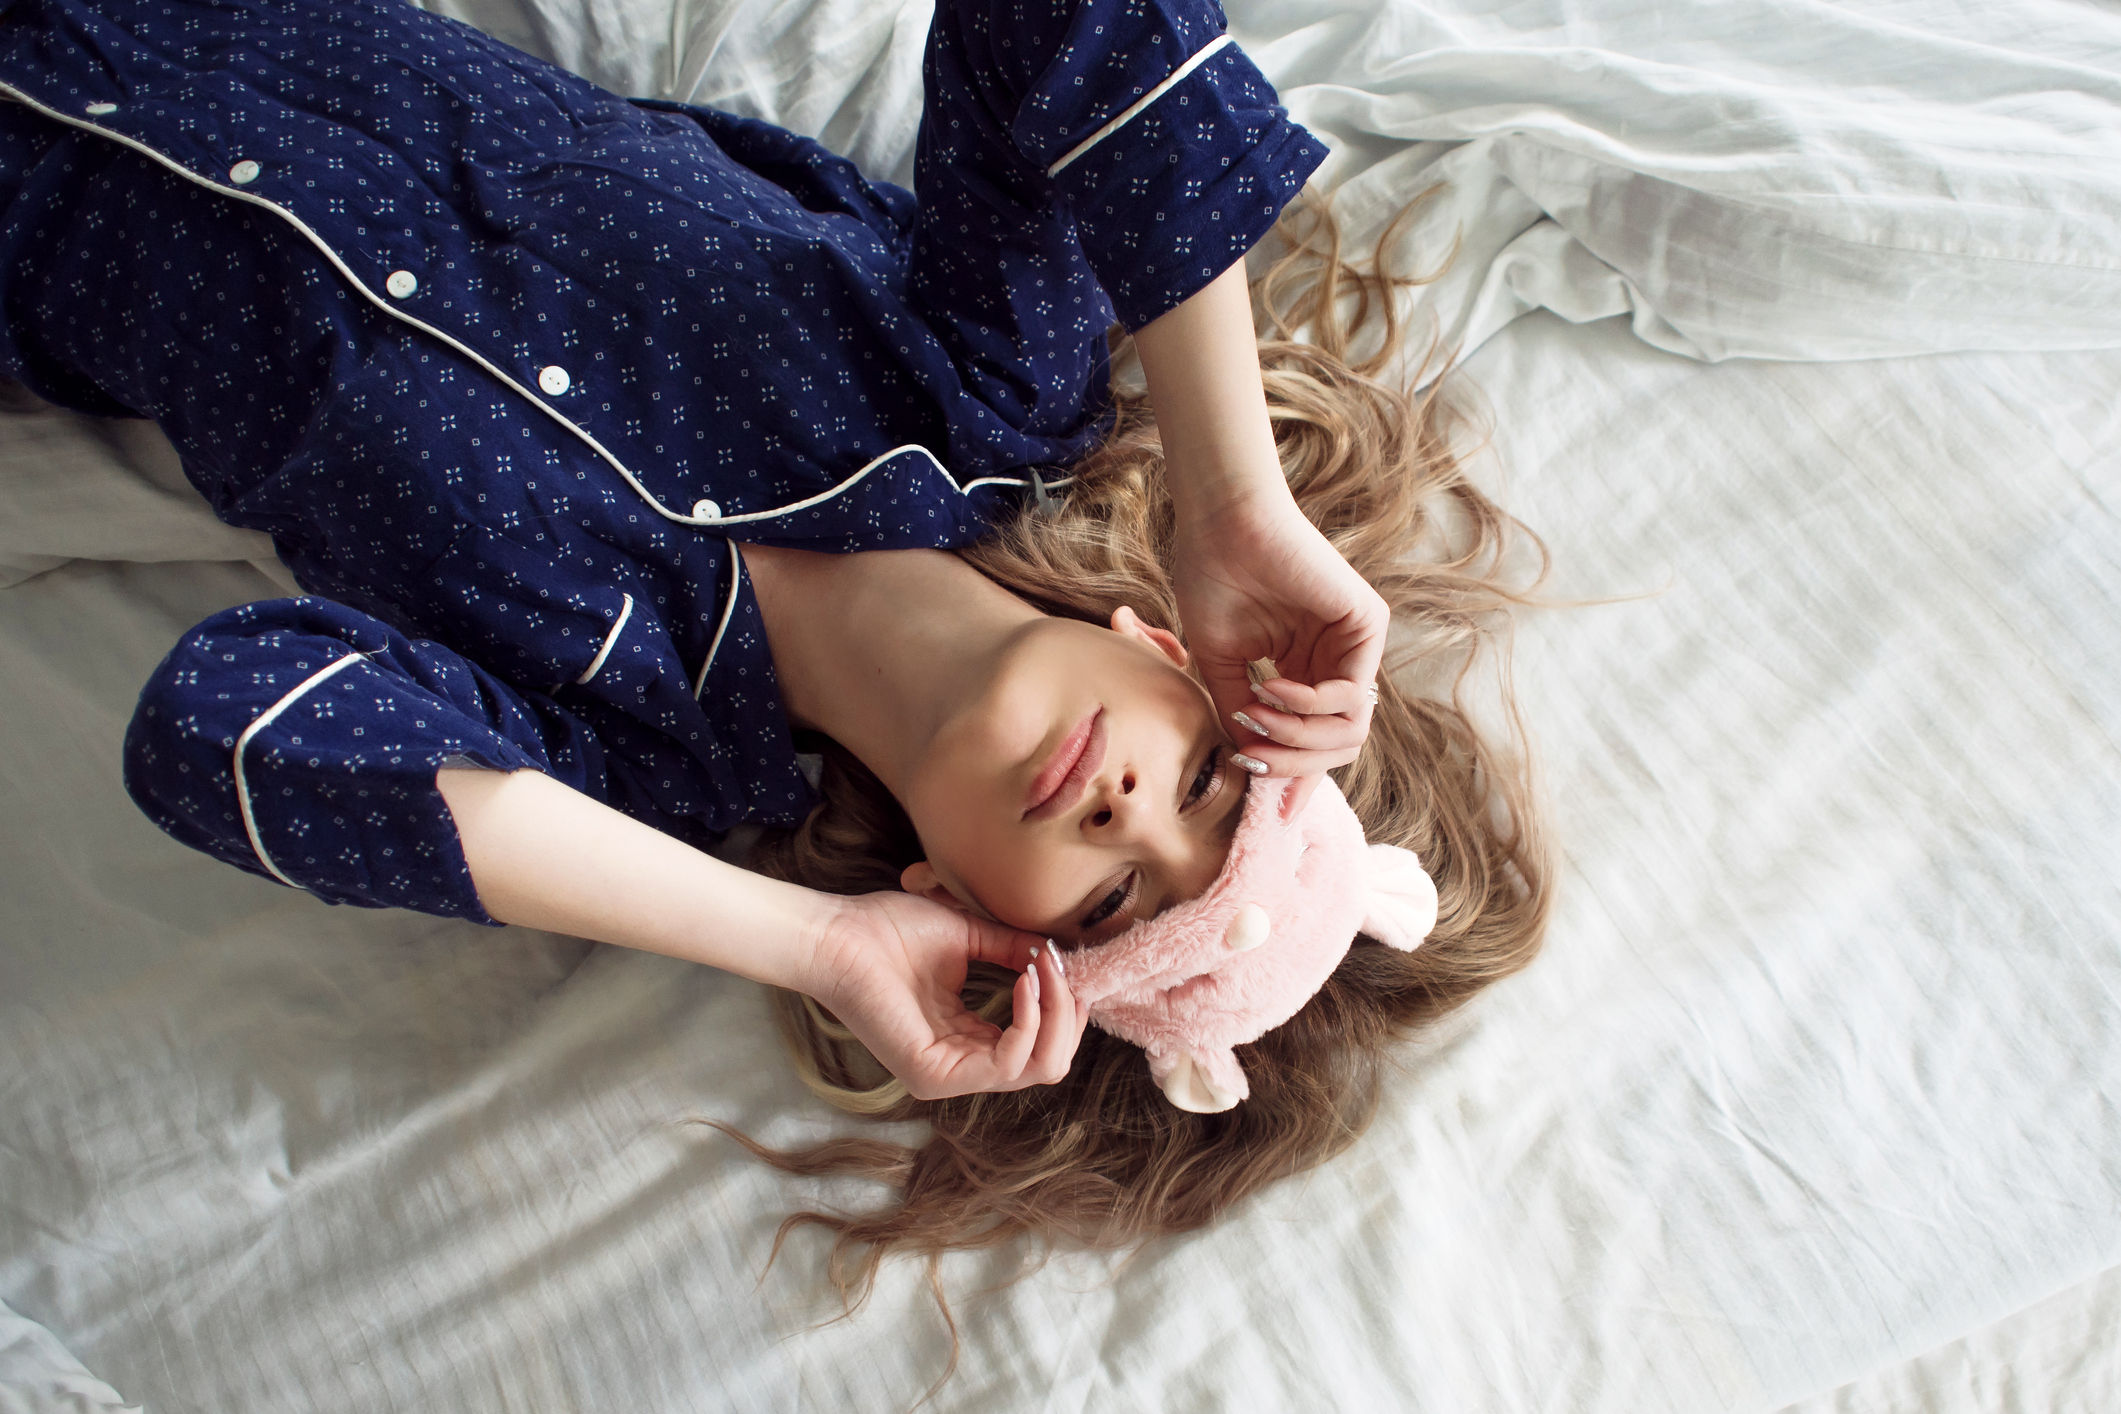 Go to bed feeling beautiful with these luxurious sleepwear